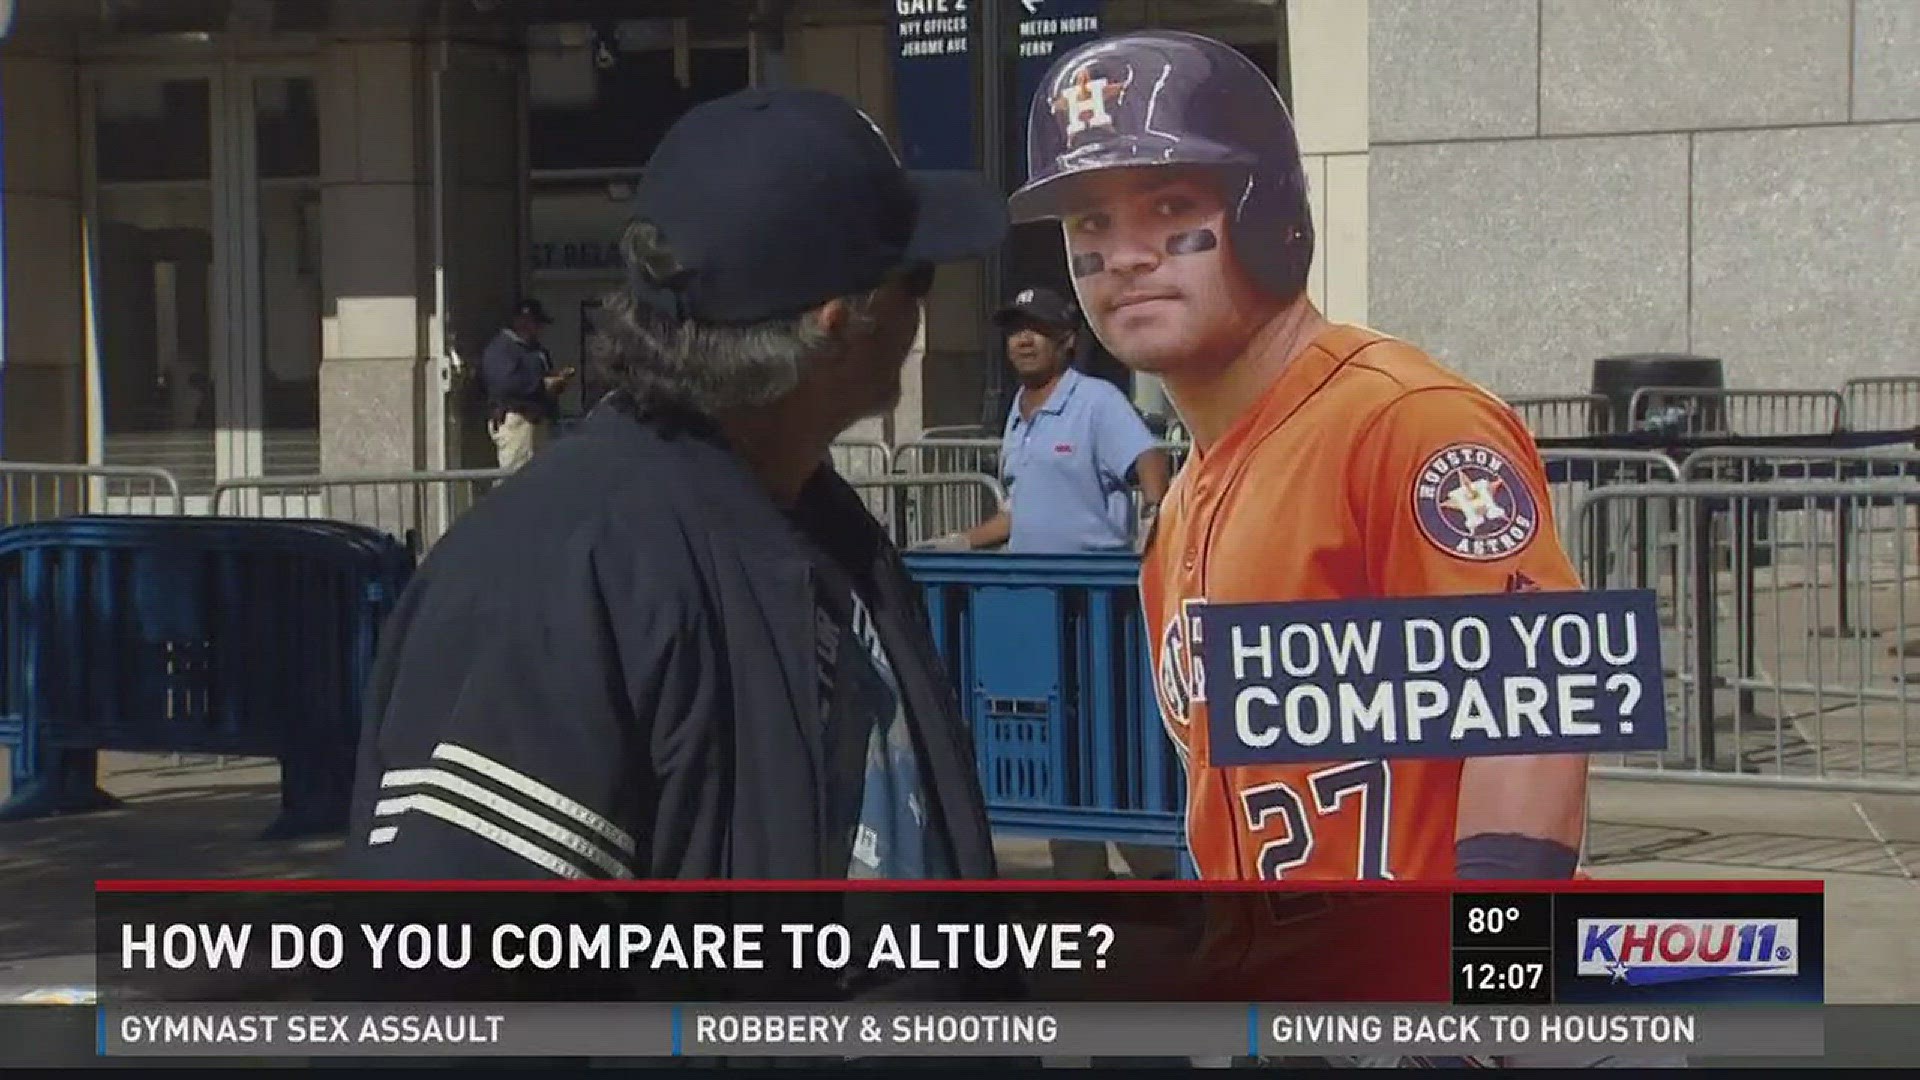 Yankee fans in New York have been loud, booing Houston's best player, Jose Altuve. So can we still convince them that Jose is the best player in the American League? That was the assignment for our Jason Bristol.